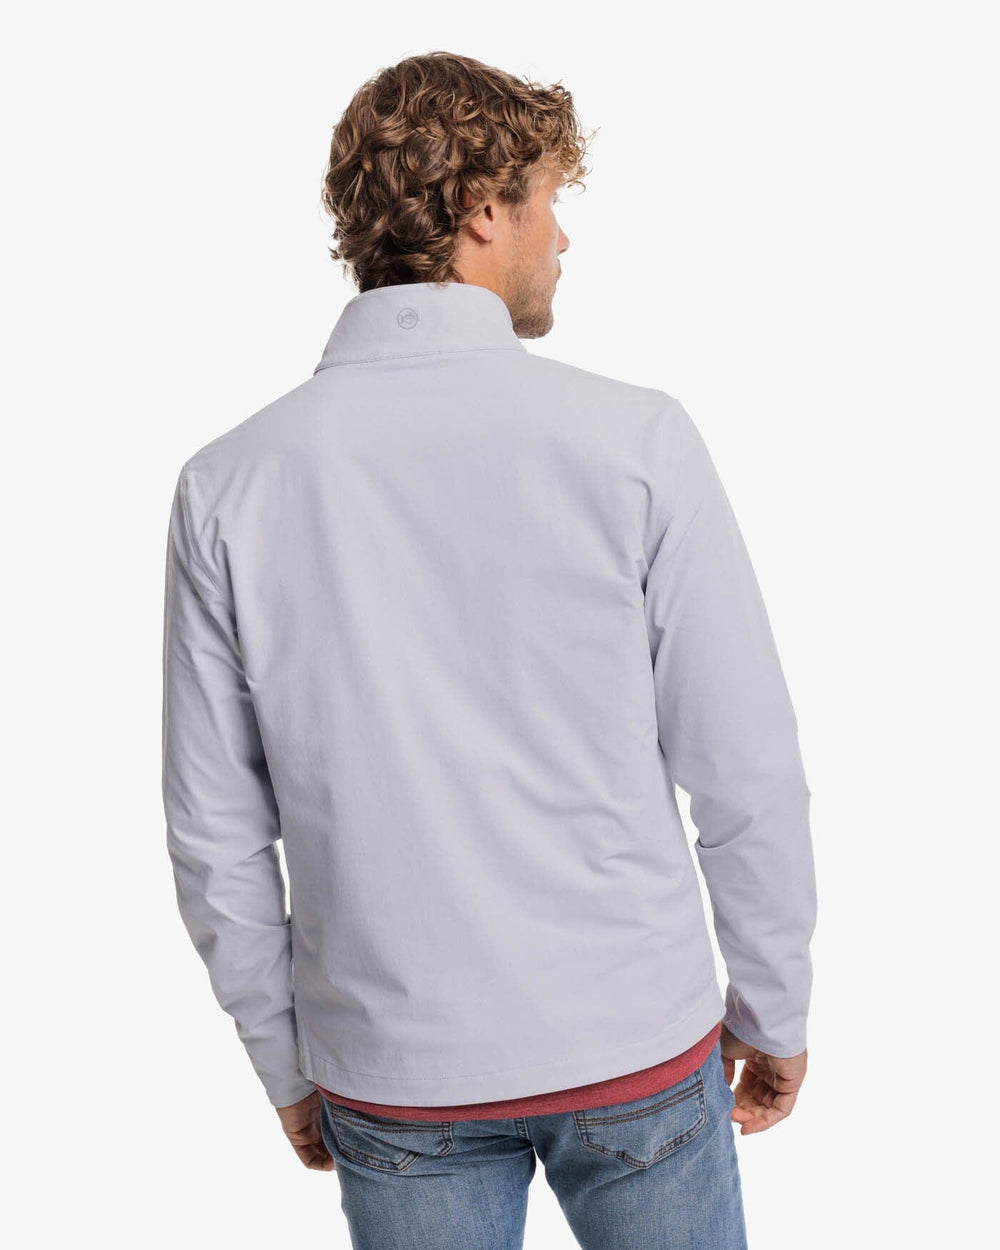 The back view of the Southern Tide Bowline Performance Jacket by Southern Tide - Platinum Grey